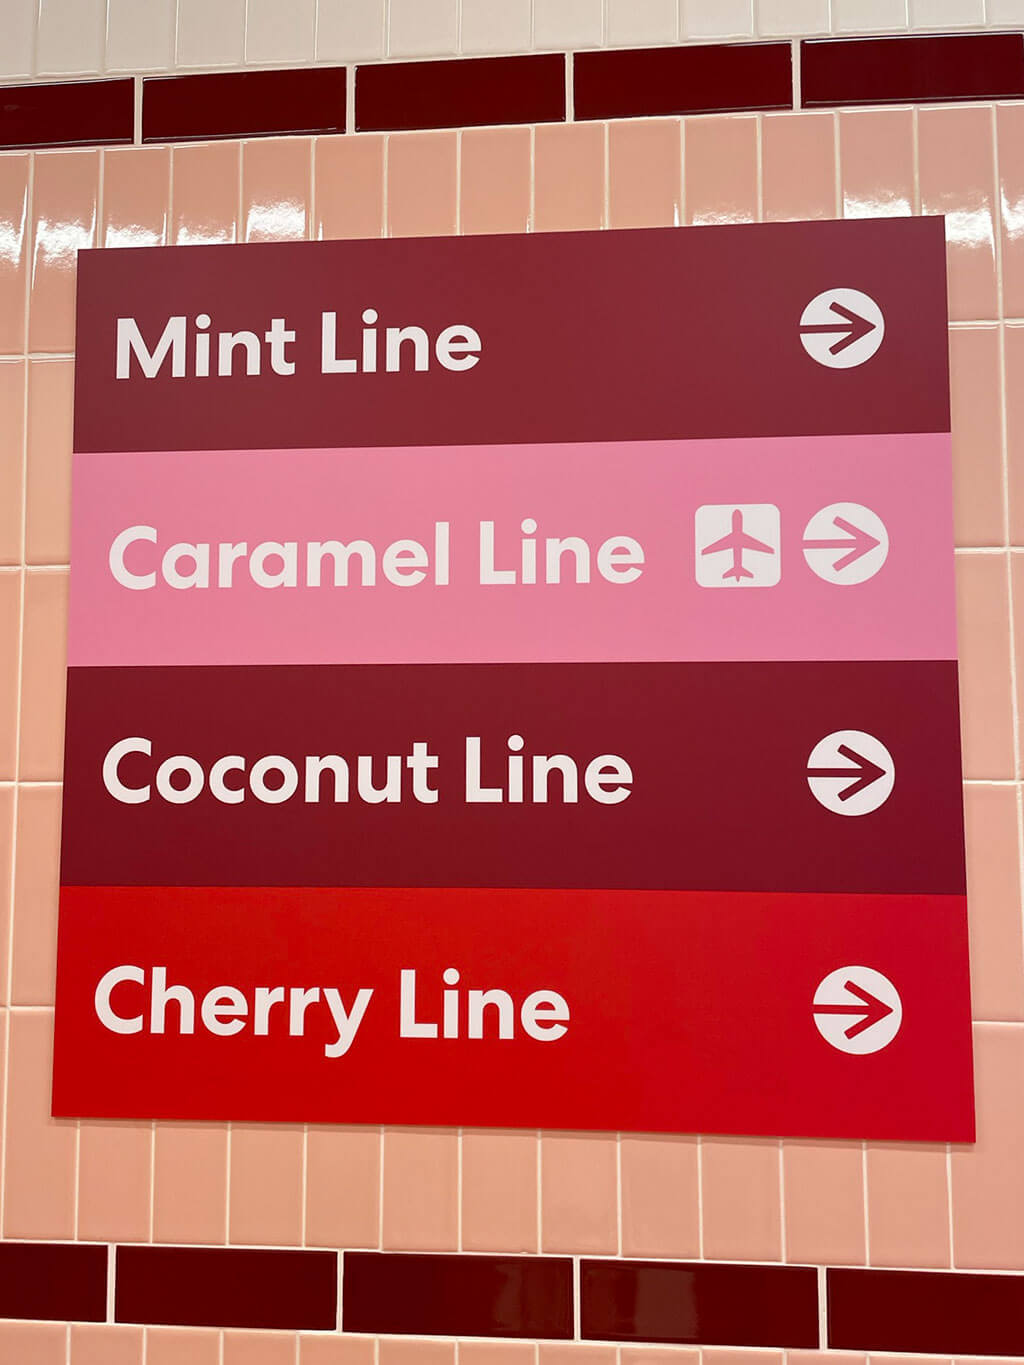 drive-swim-fly-chicago-museum-of-ice-cream-magnificent-mile-sweets-candy-dessert-treats-train-sign